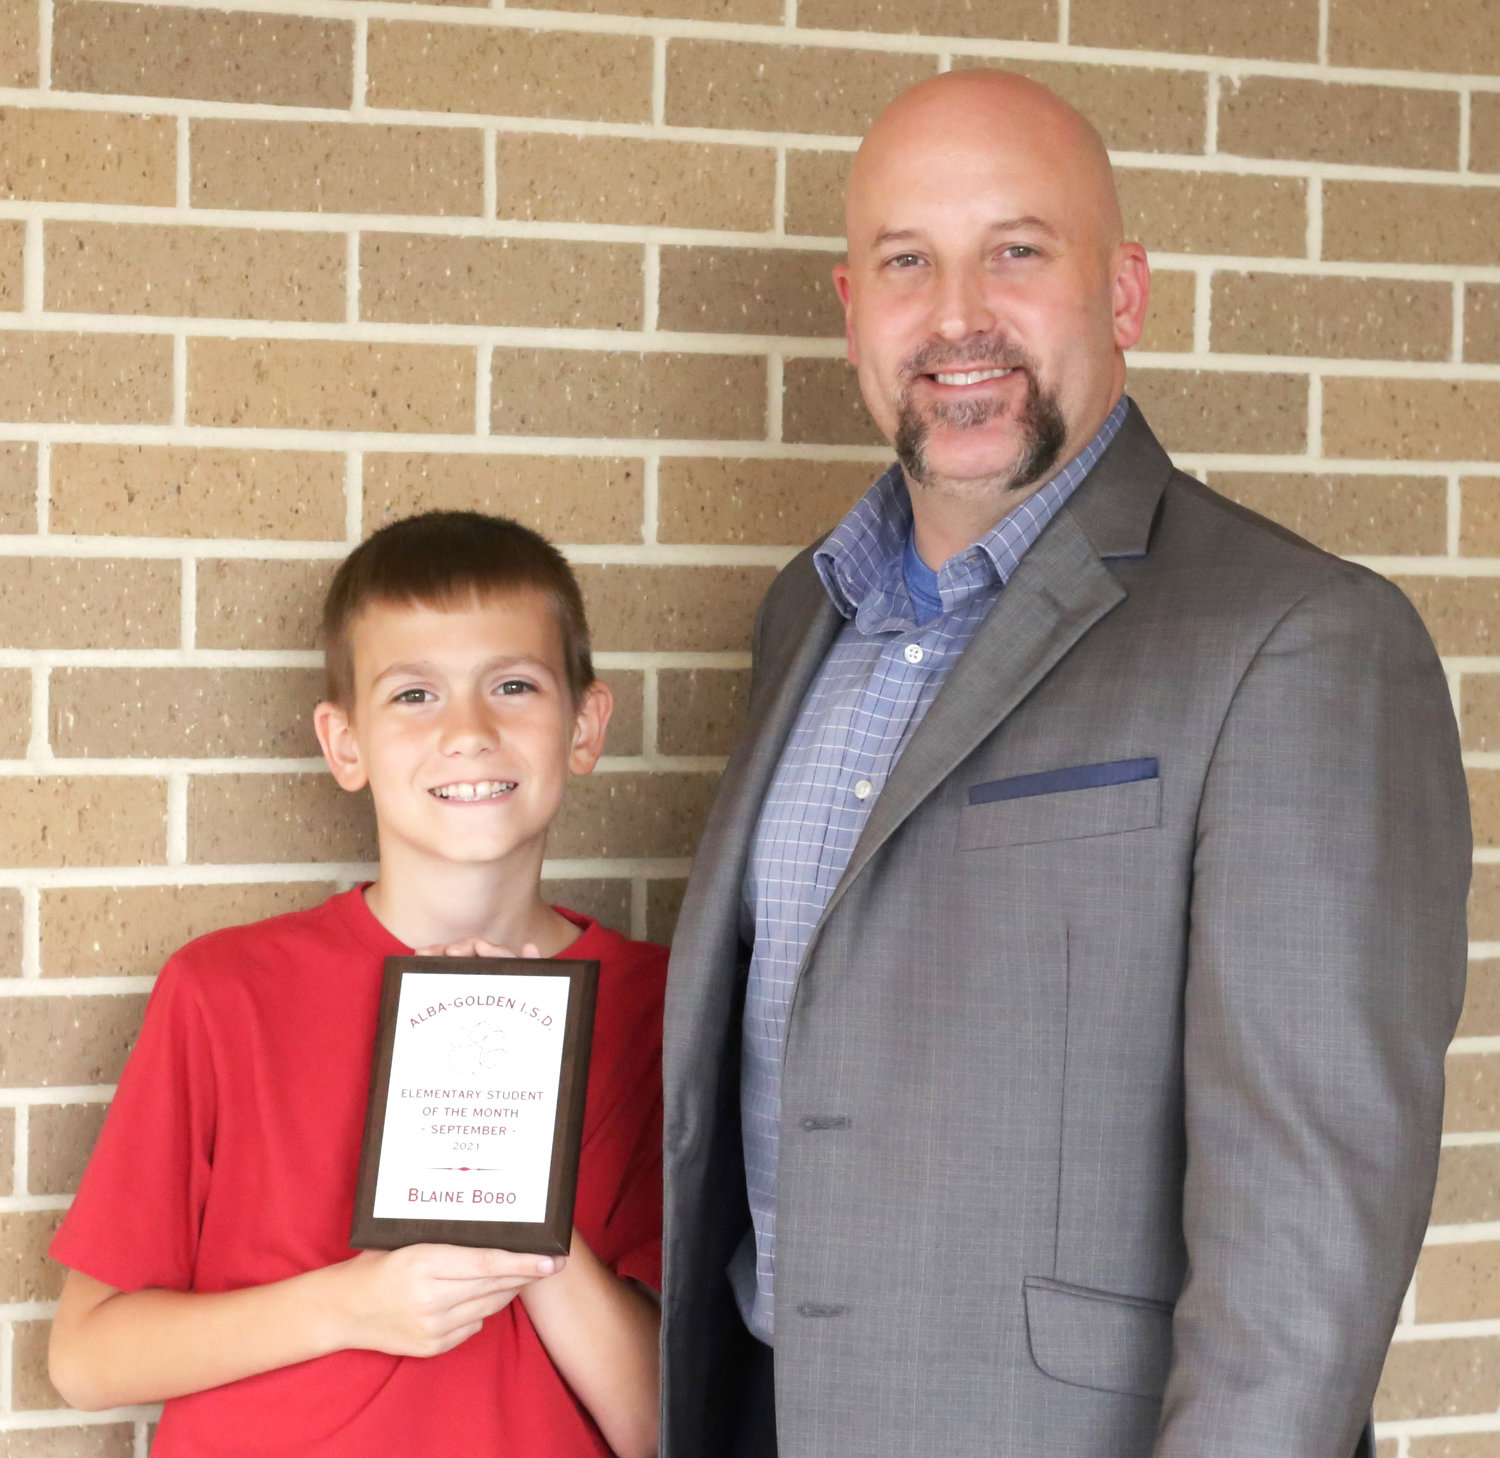 Alba-Golden fourth-grader Blaine Bobo, pictured with elementary school principal Kevin Wright, was selected as the elementary school student of the month.